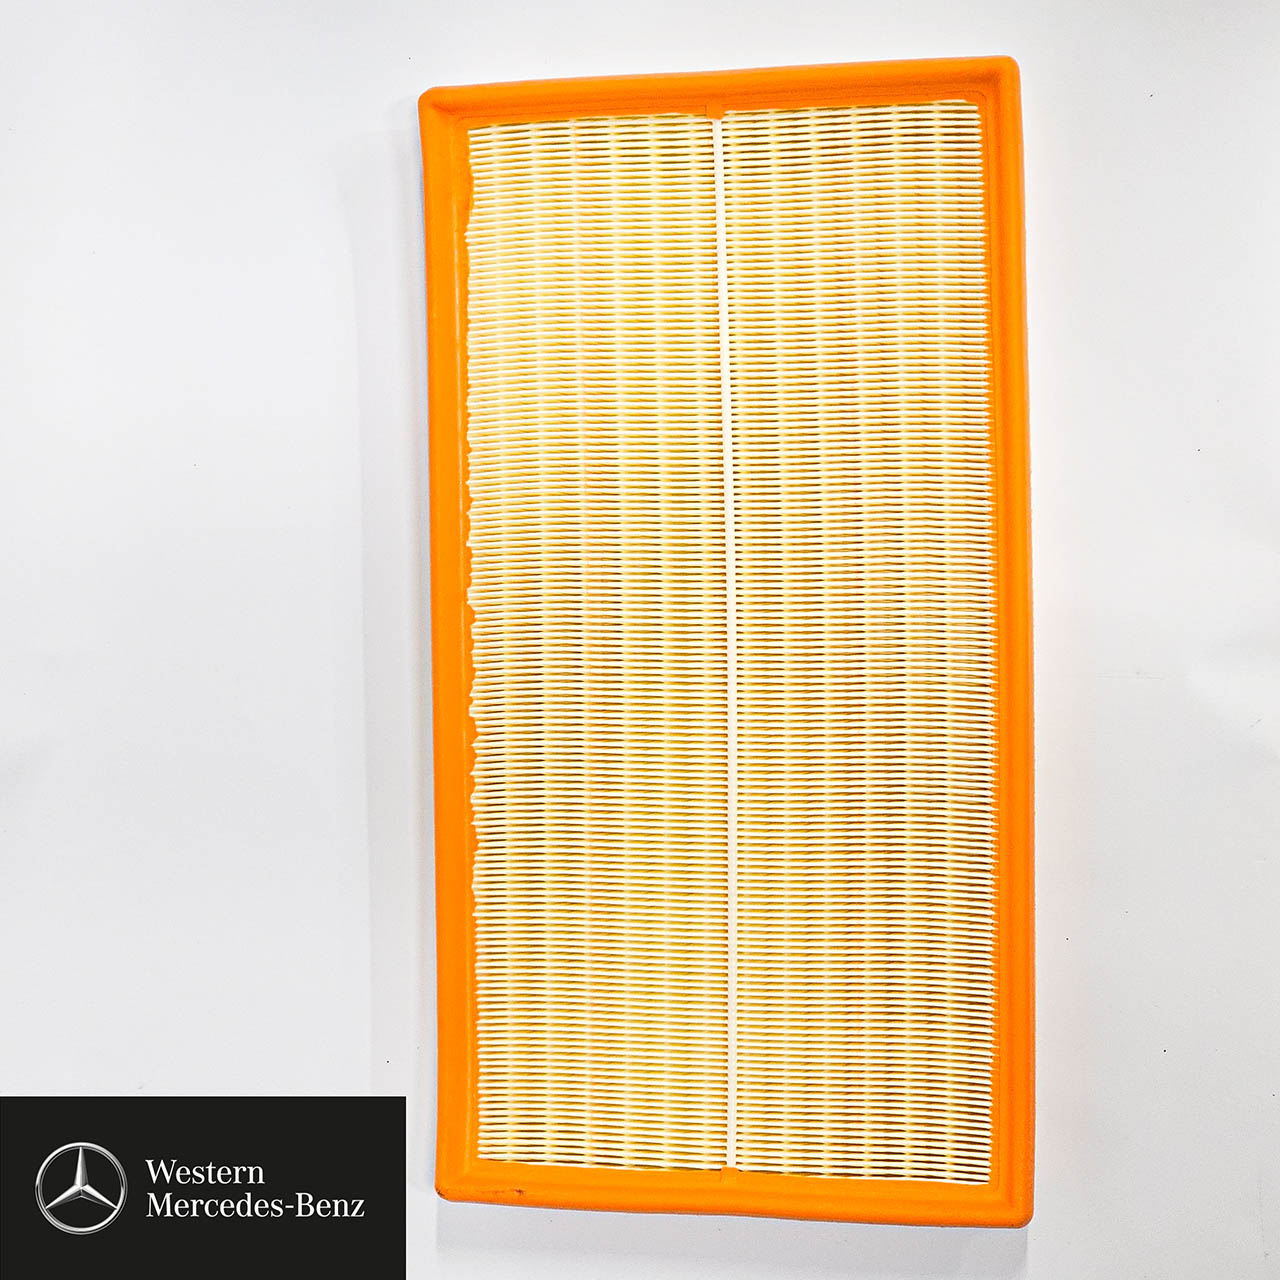 Air filter A6510900051 for 447 model series with OM651 diesel engine